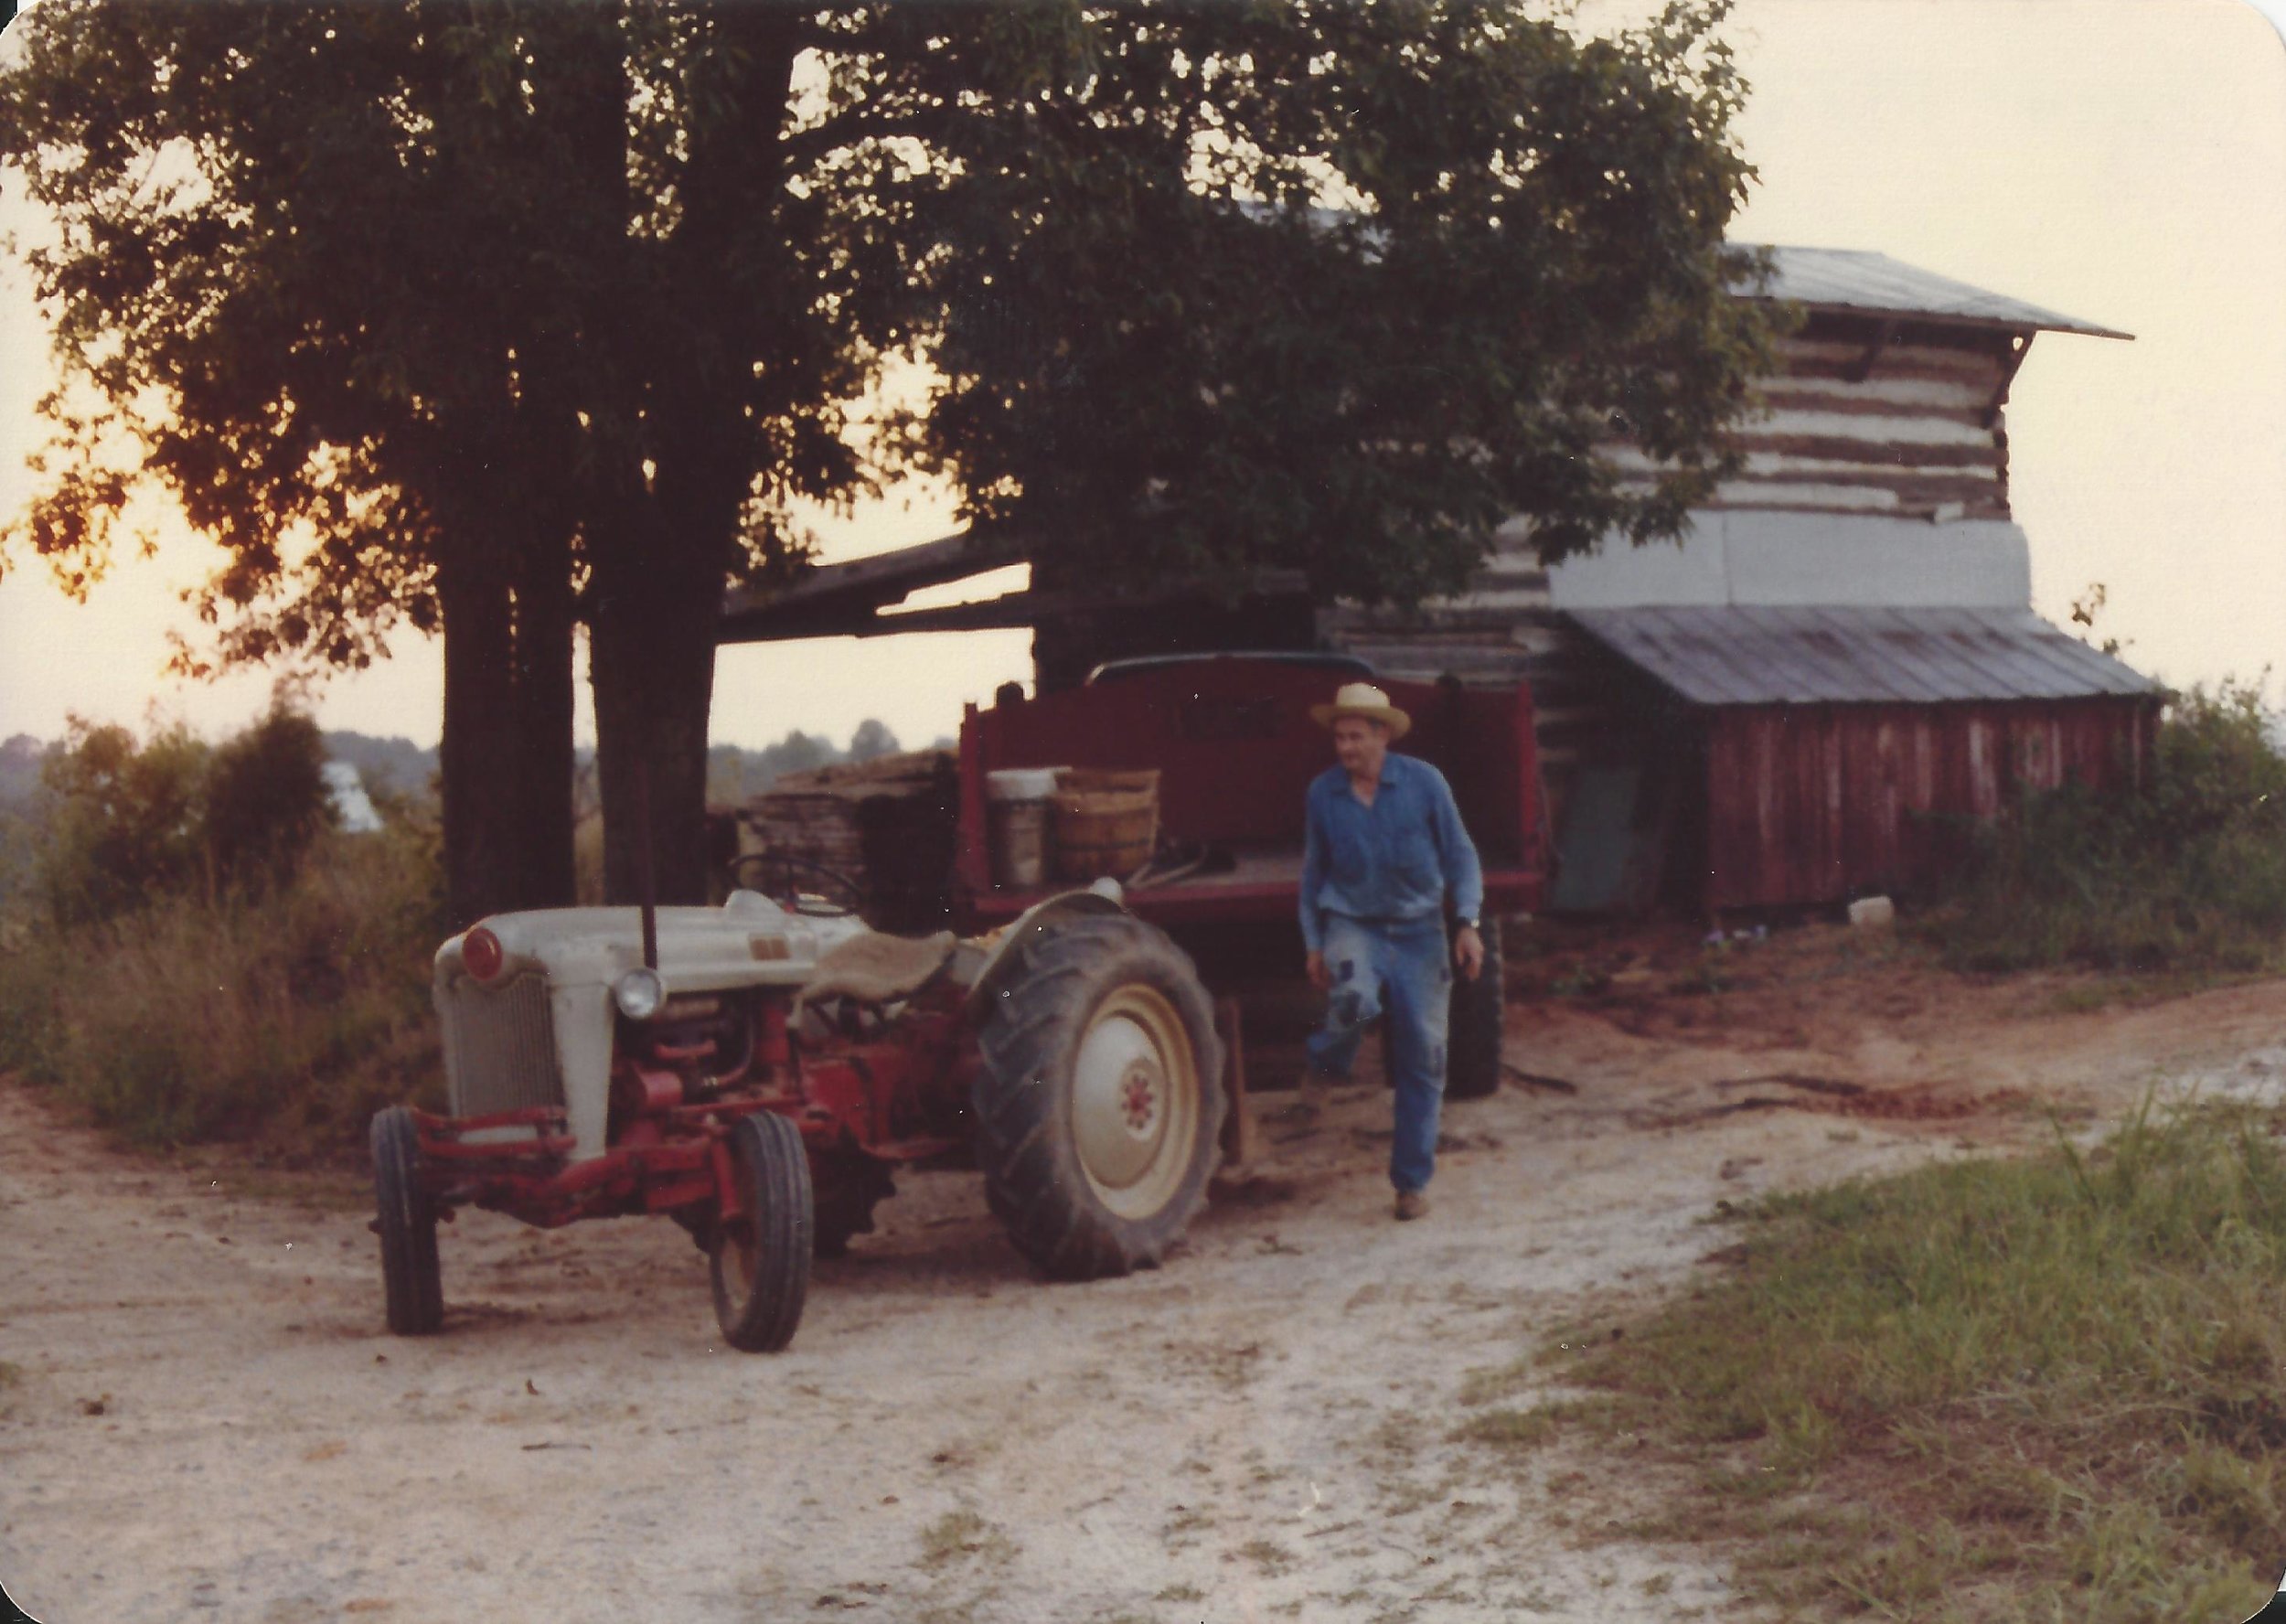 Pa & his tractor